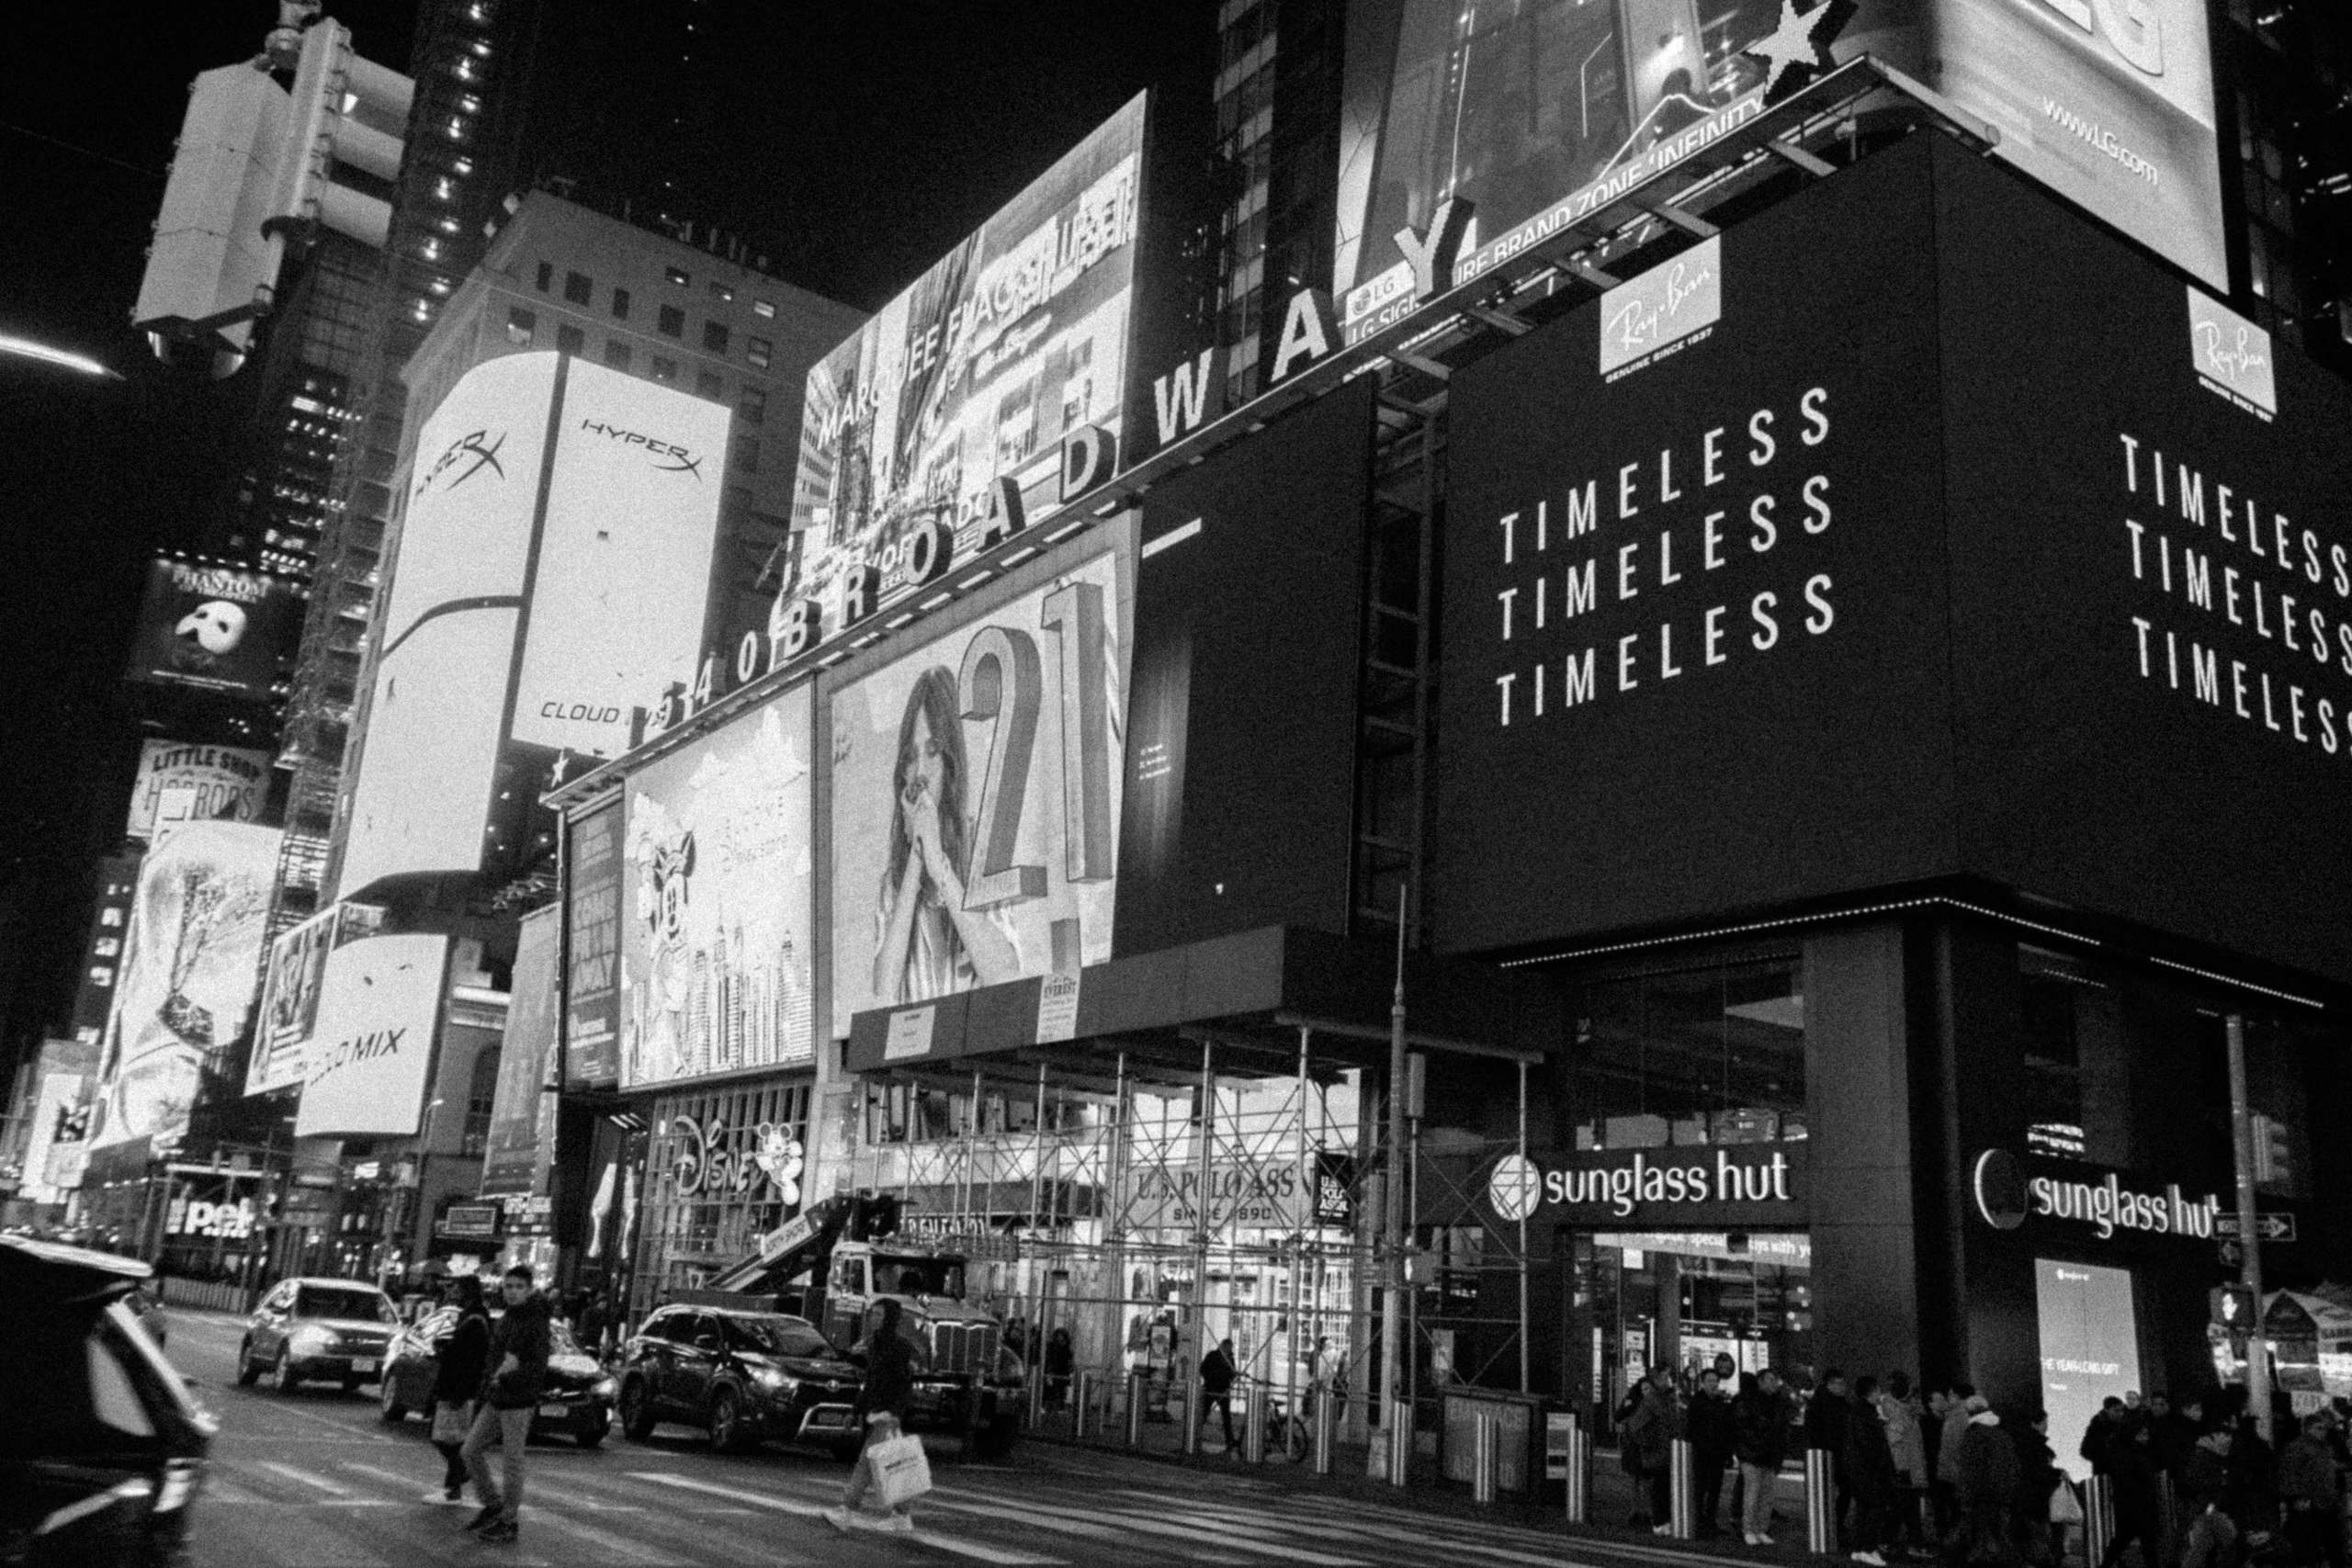 Advertisements in Times Square.